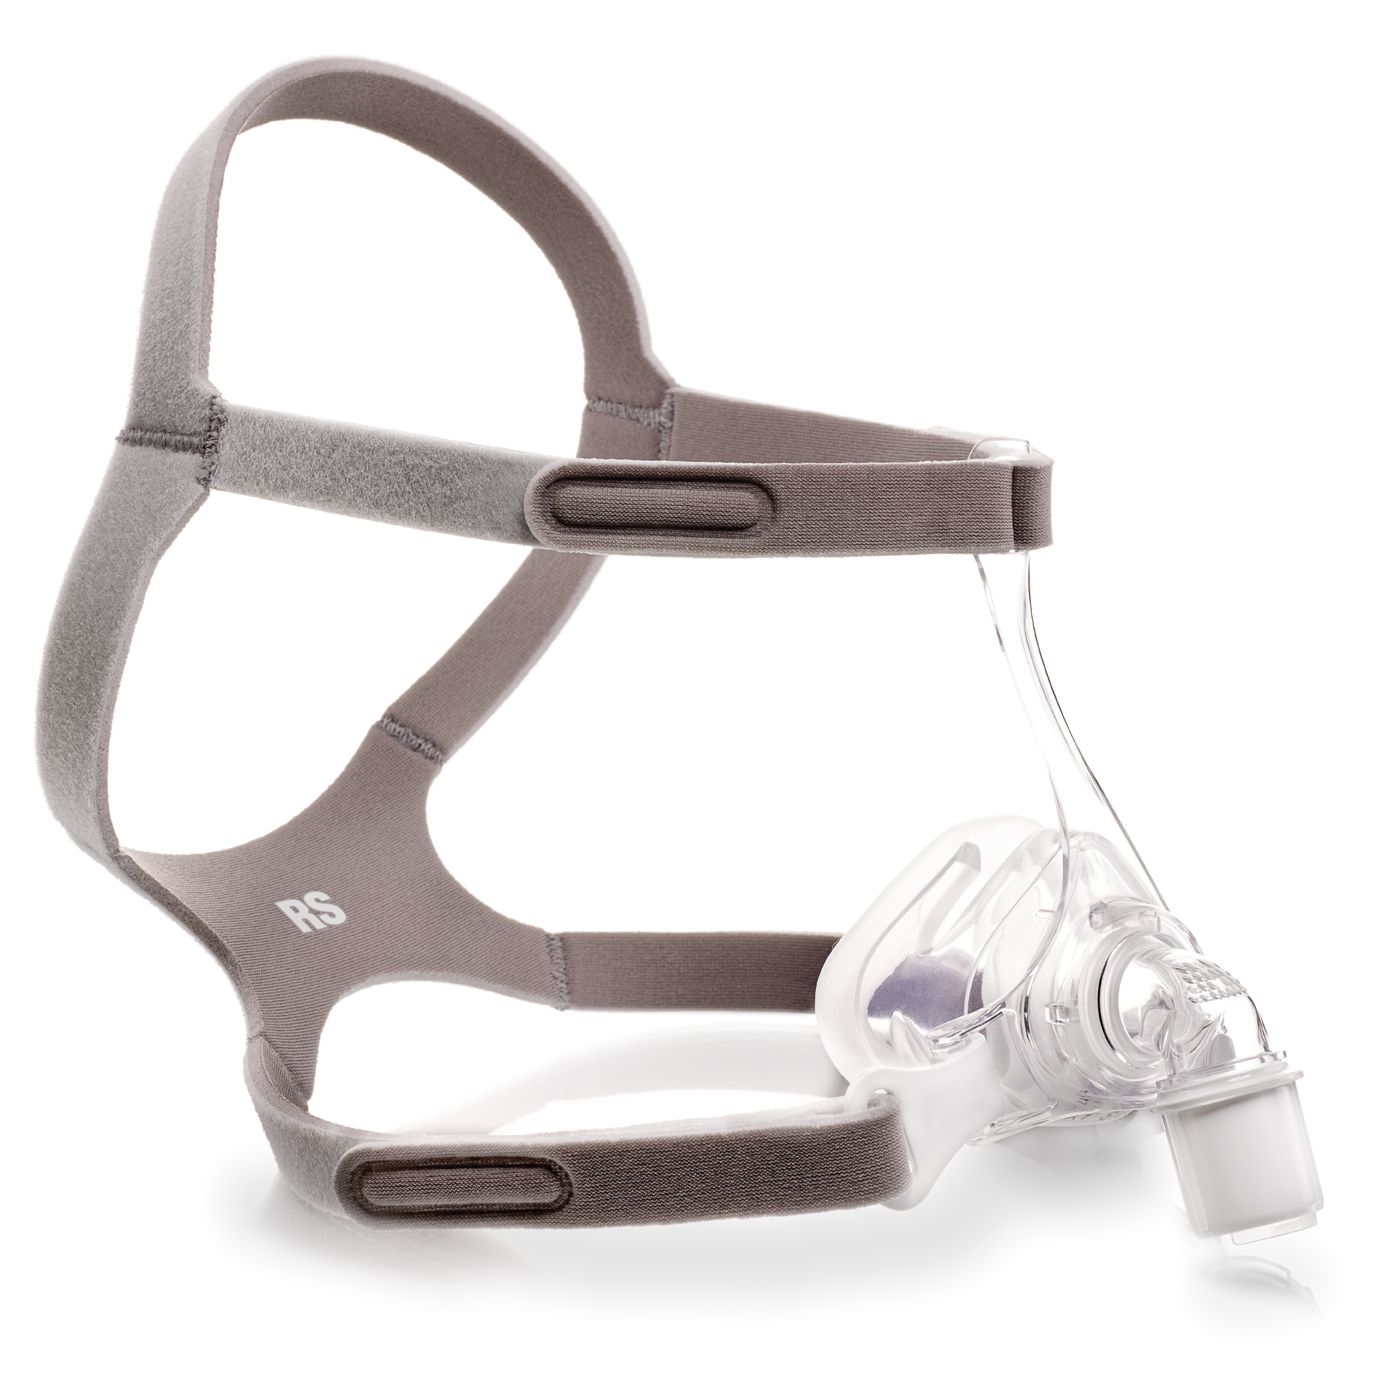 Philips PICO CPAP nasal mask with exhalation valve and headgear